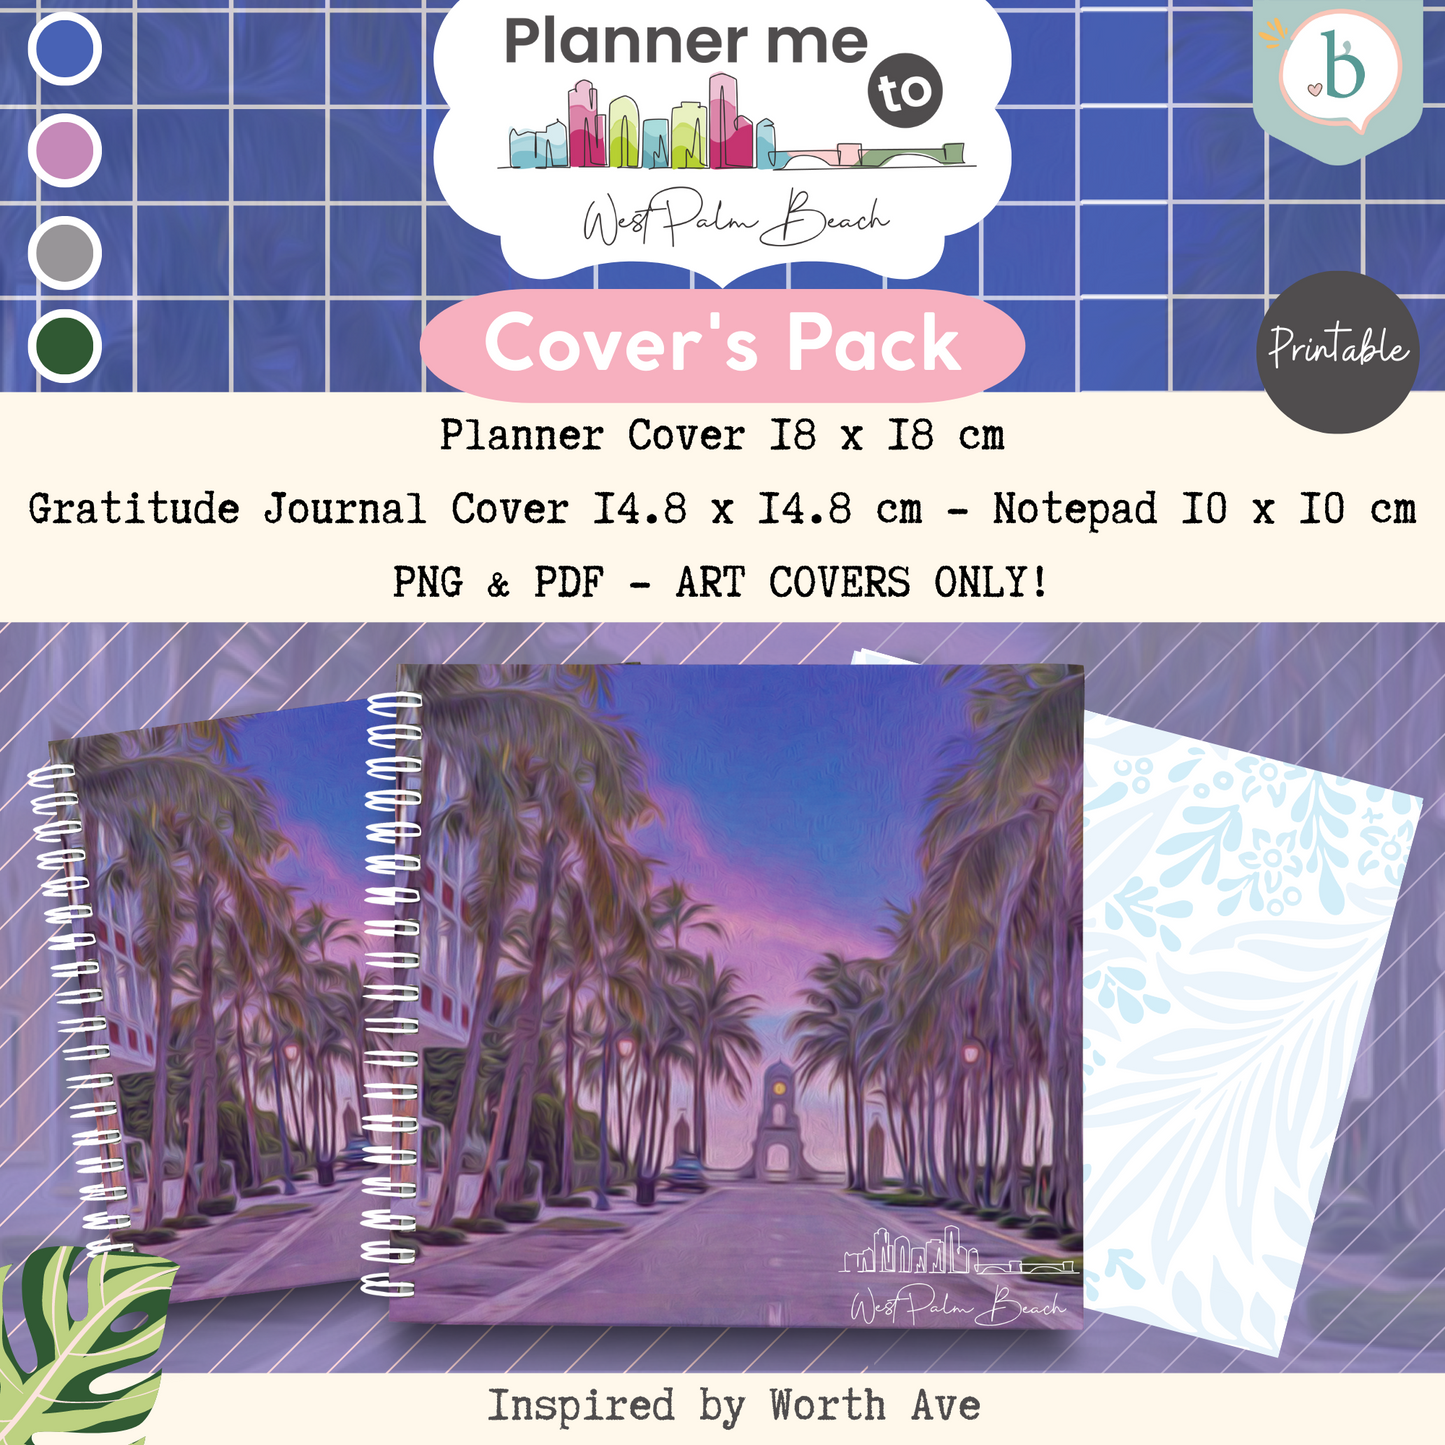 IVANA MATTHEWS´S Planner me to Palm Beach - Printable Planner, Journal & Notepad Cover